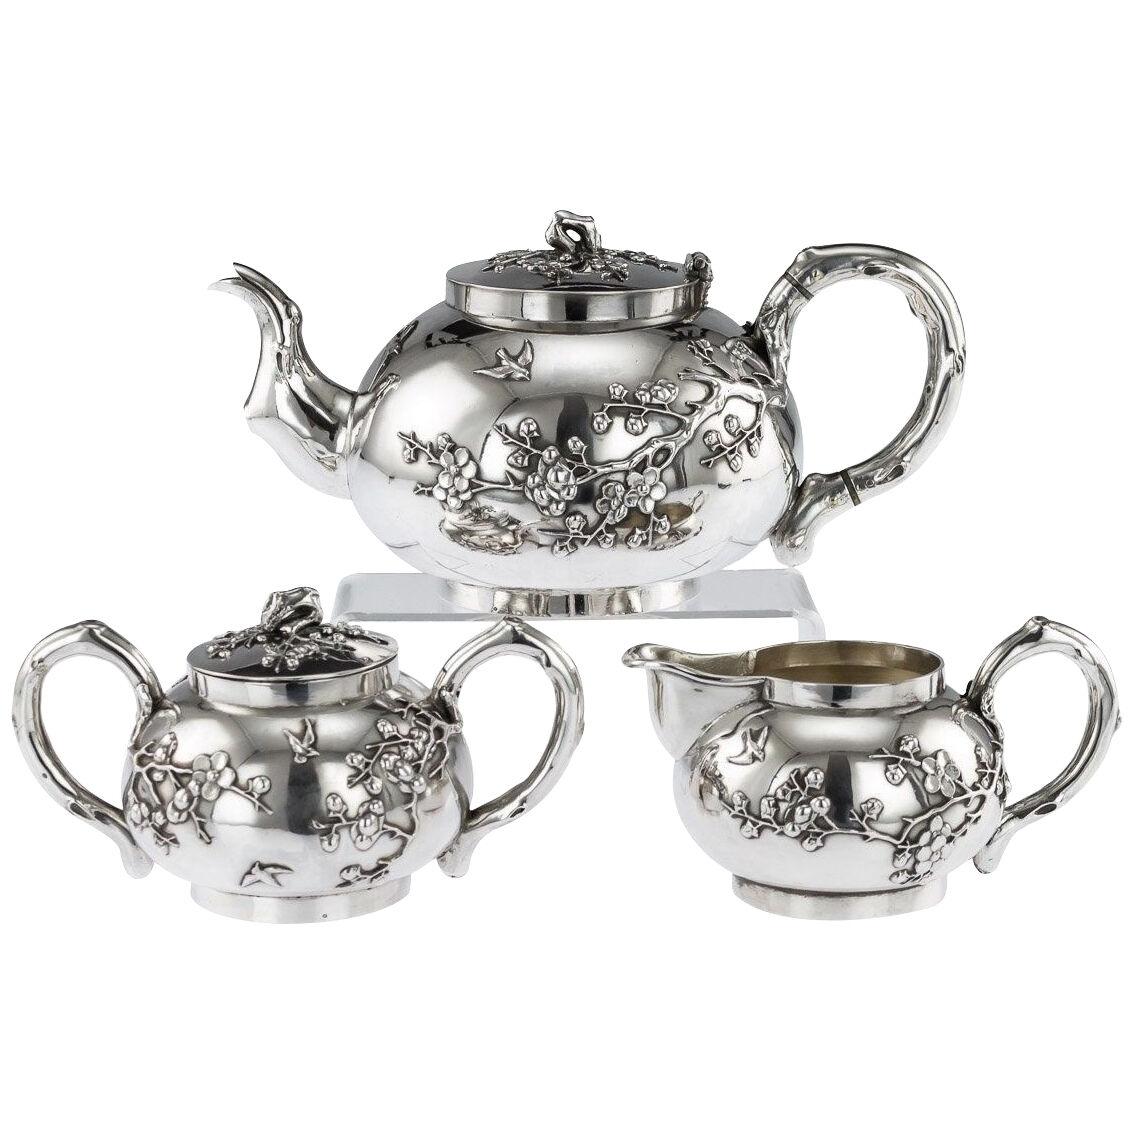 20thC Chinese Solid Silver Cherry Blossom Tea Set, Chong Woo C.1900